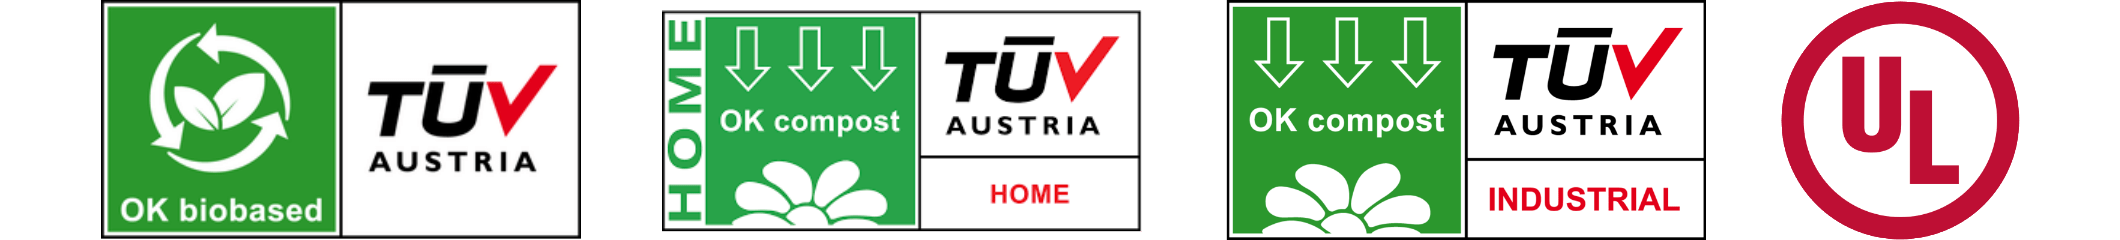 TUV Austria OK biobased (4 stars)/TUV Austria OK compost Home & Industrial/UL Validated: 99% recovery rate of available fibers